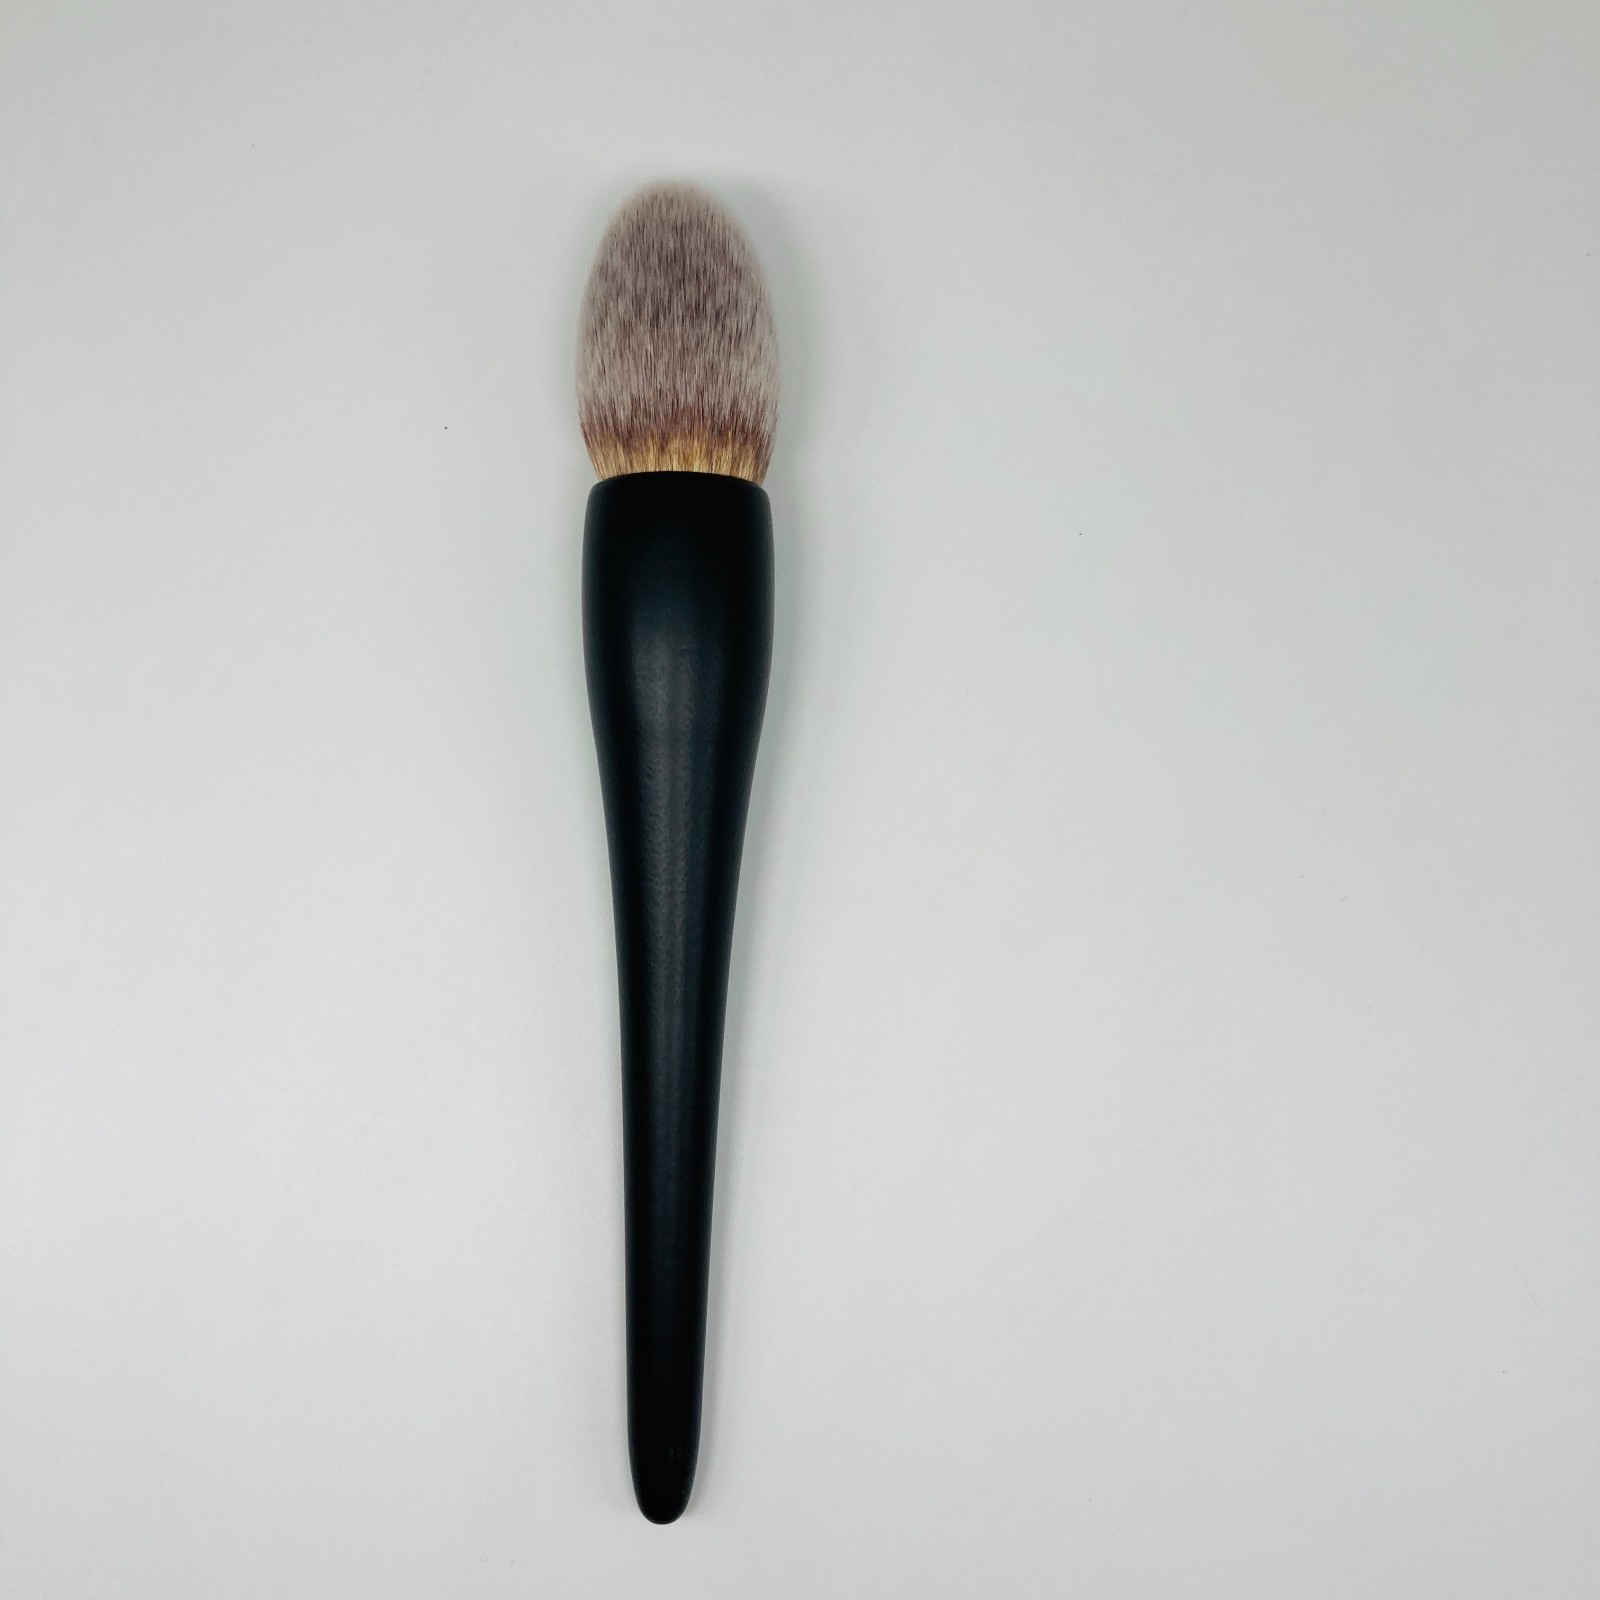 Suprabeauty cream makeup brush factory direct supply for beauty-1